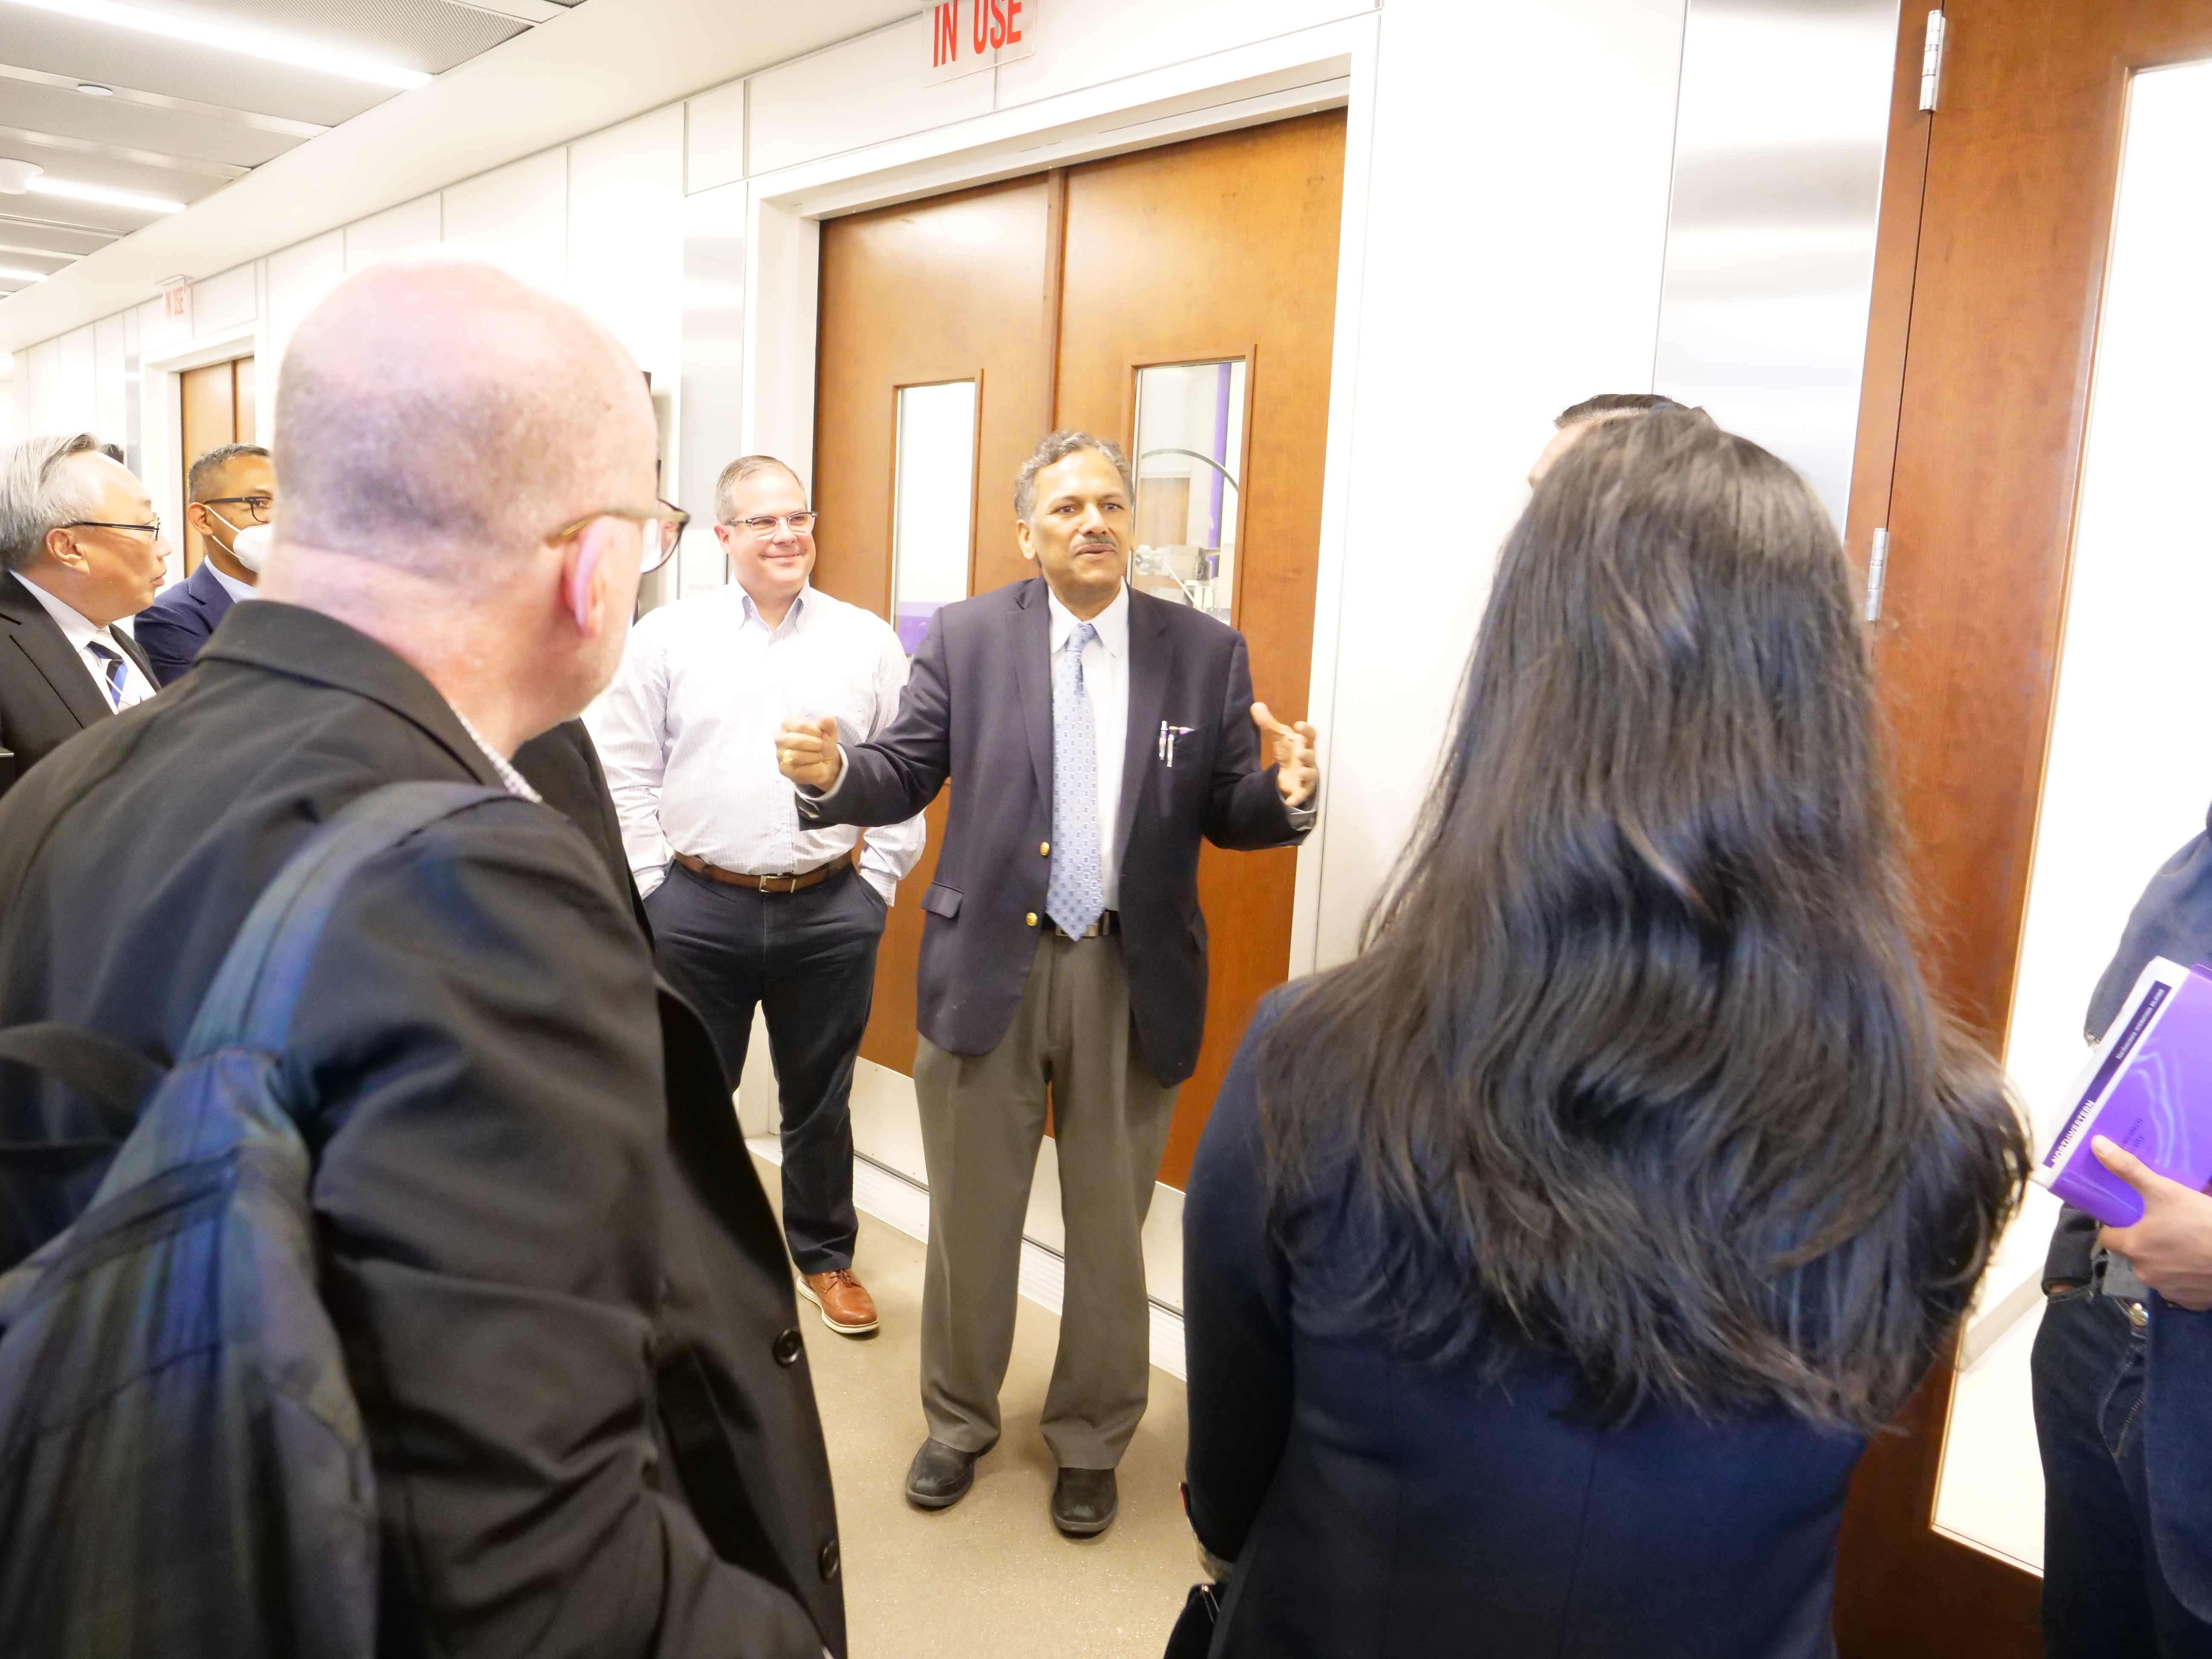 Professor Dravid with the group touring NUANCE Facilities